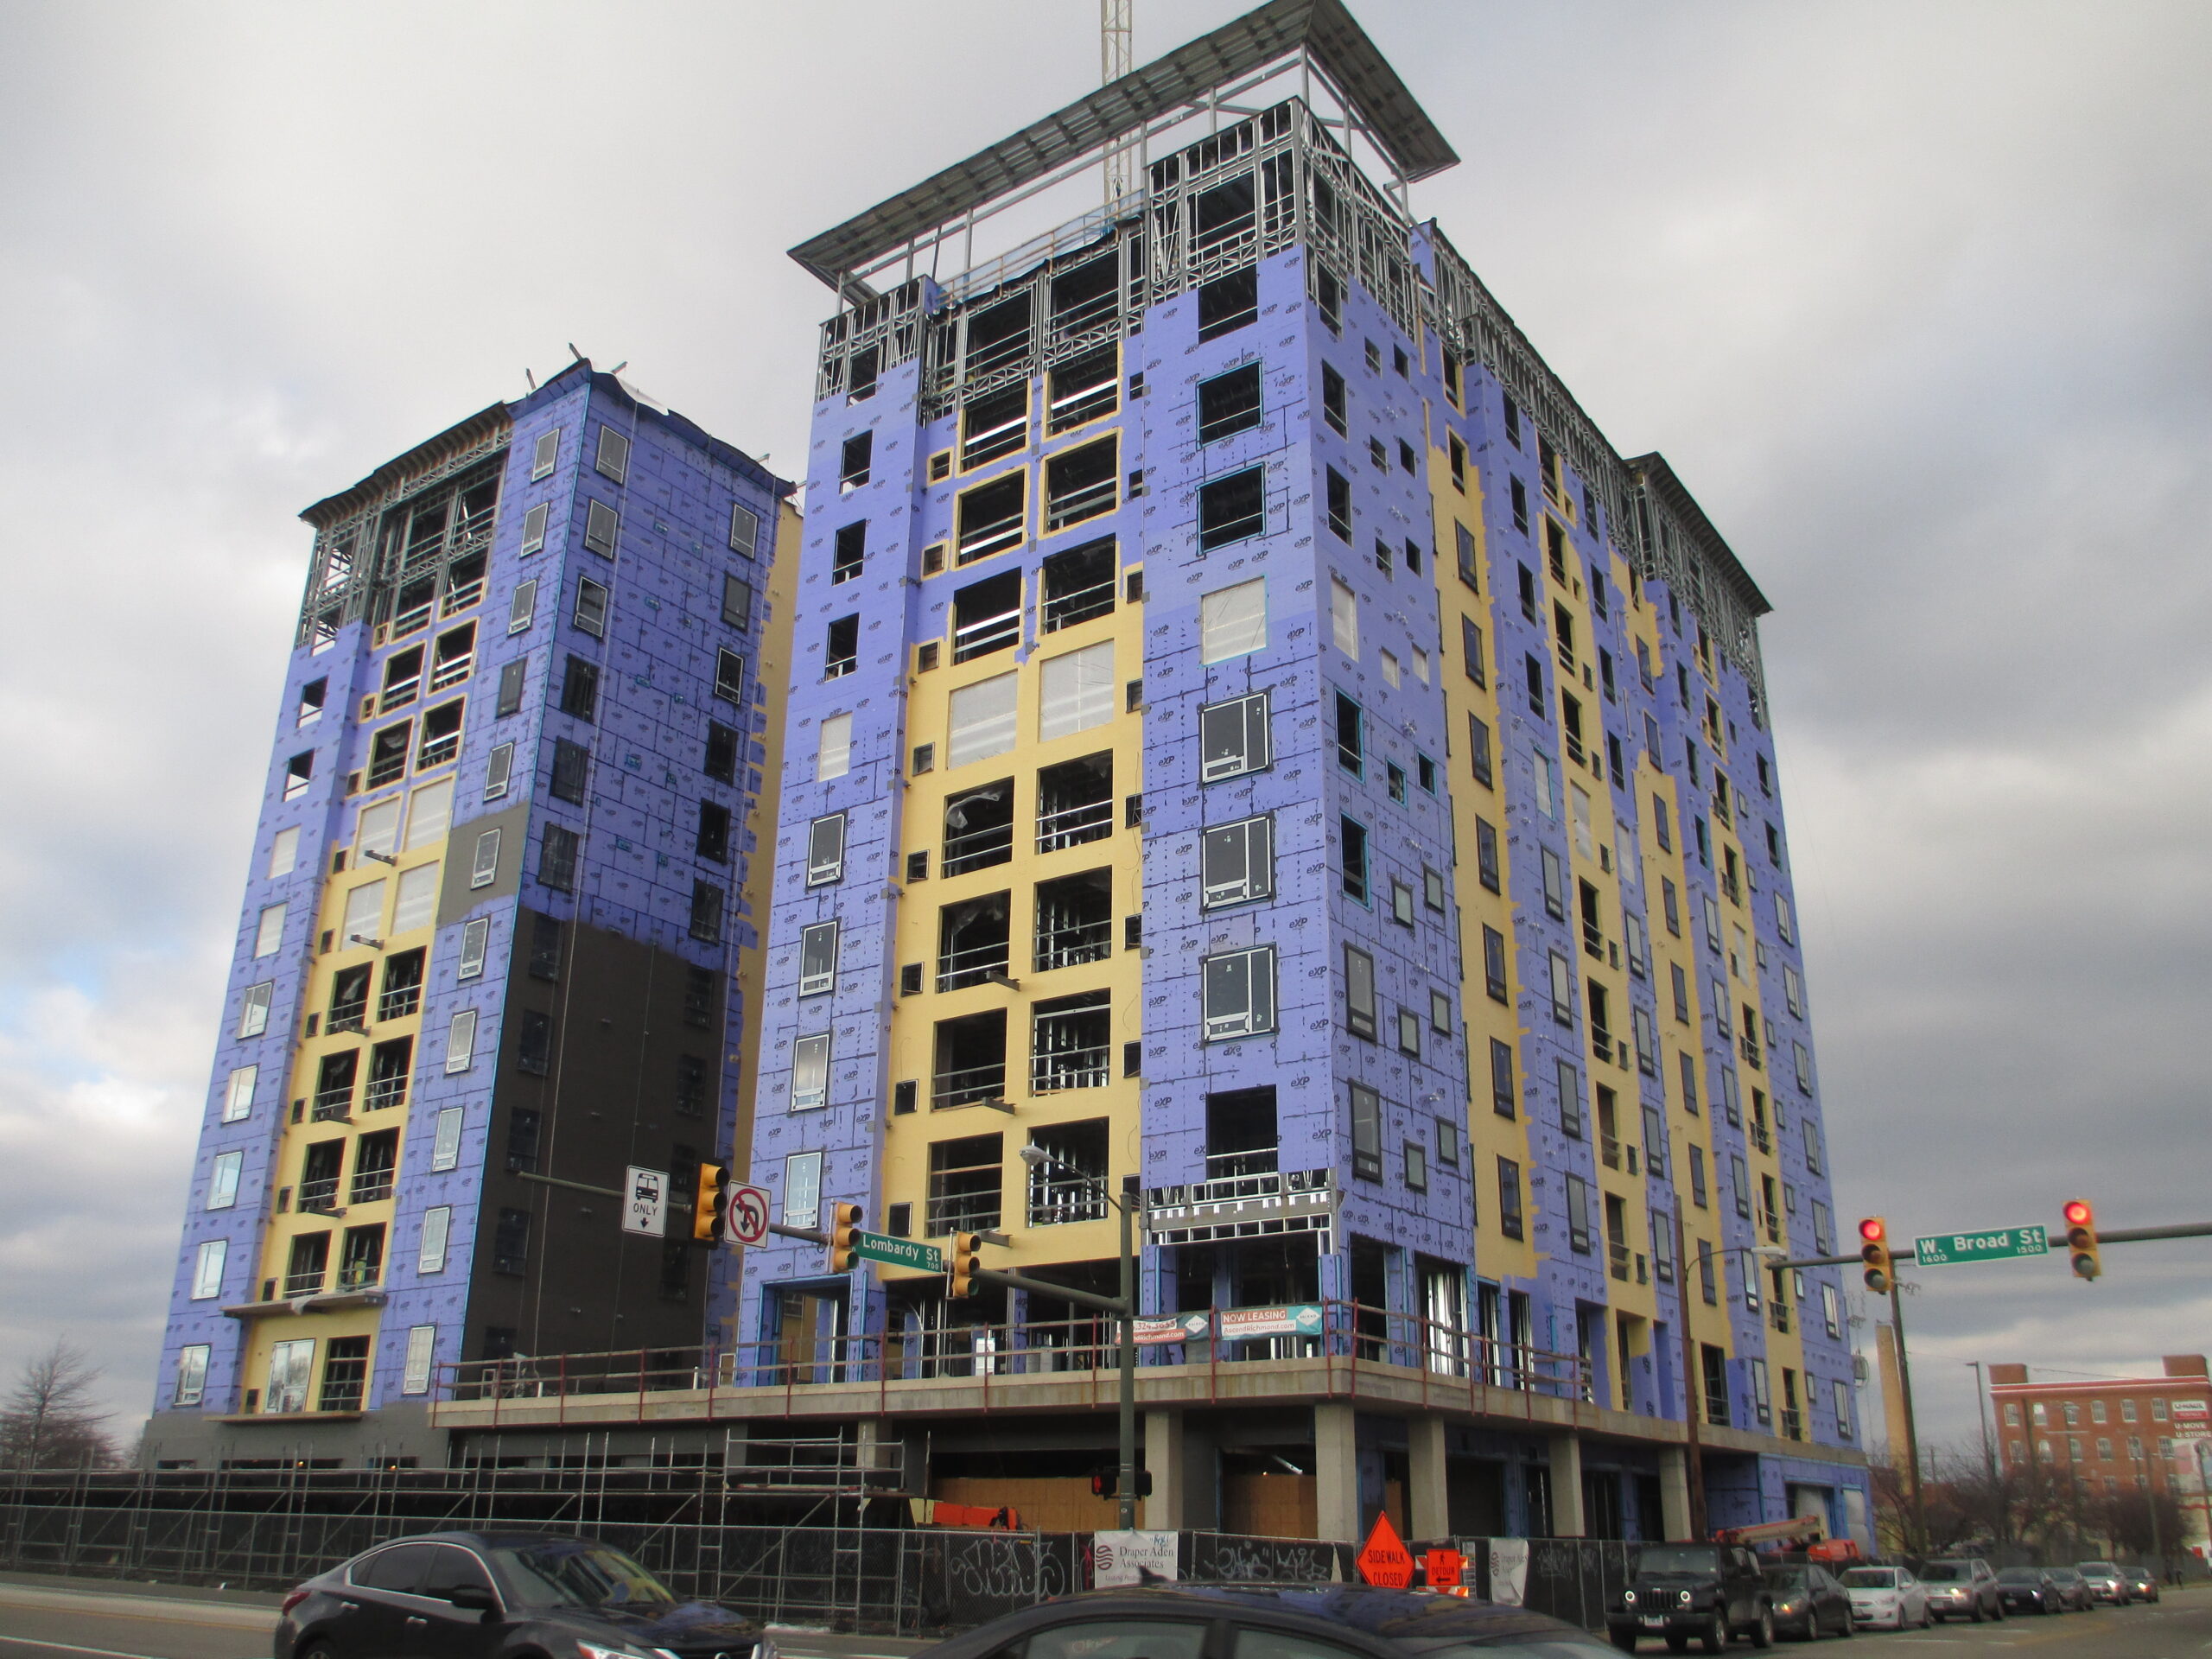 Ascend Apartments going up in Richmond